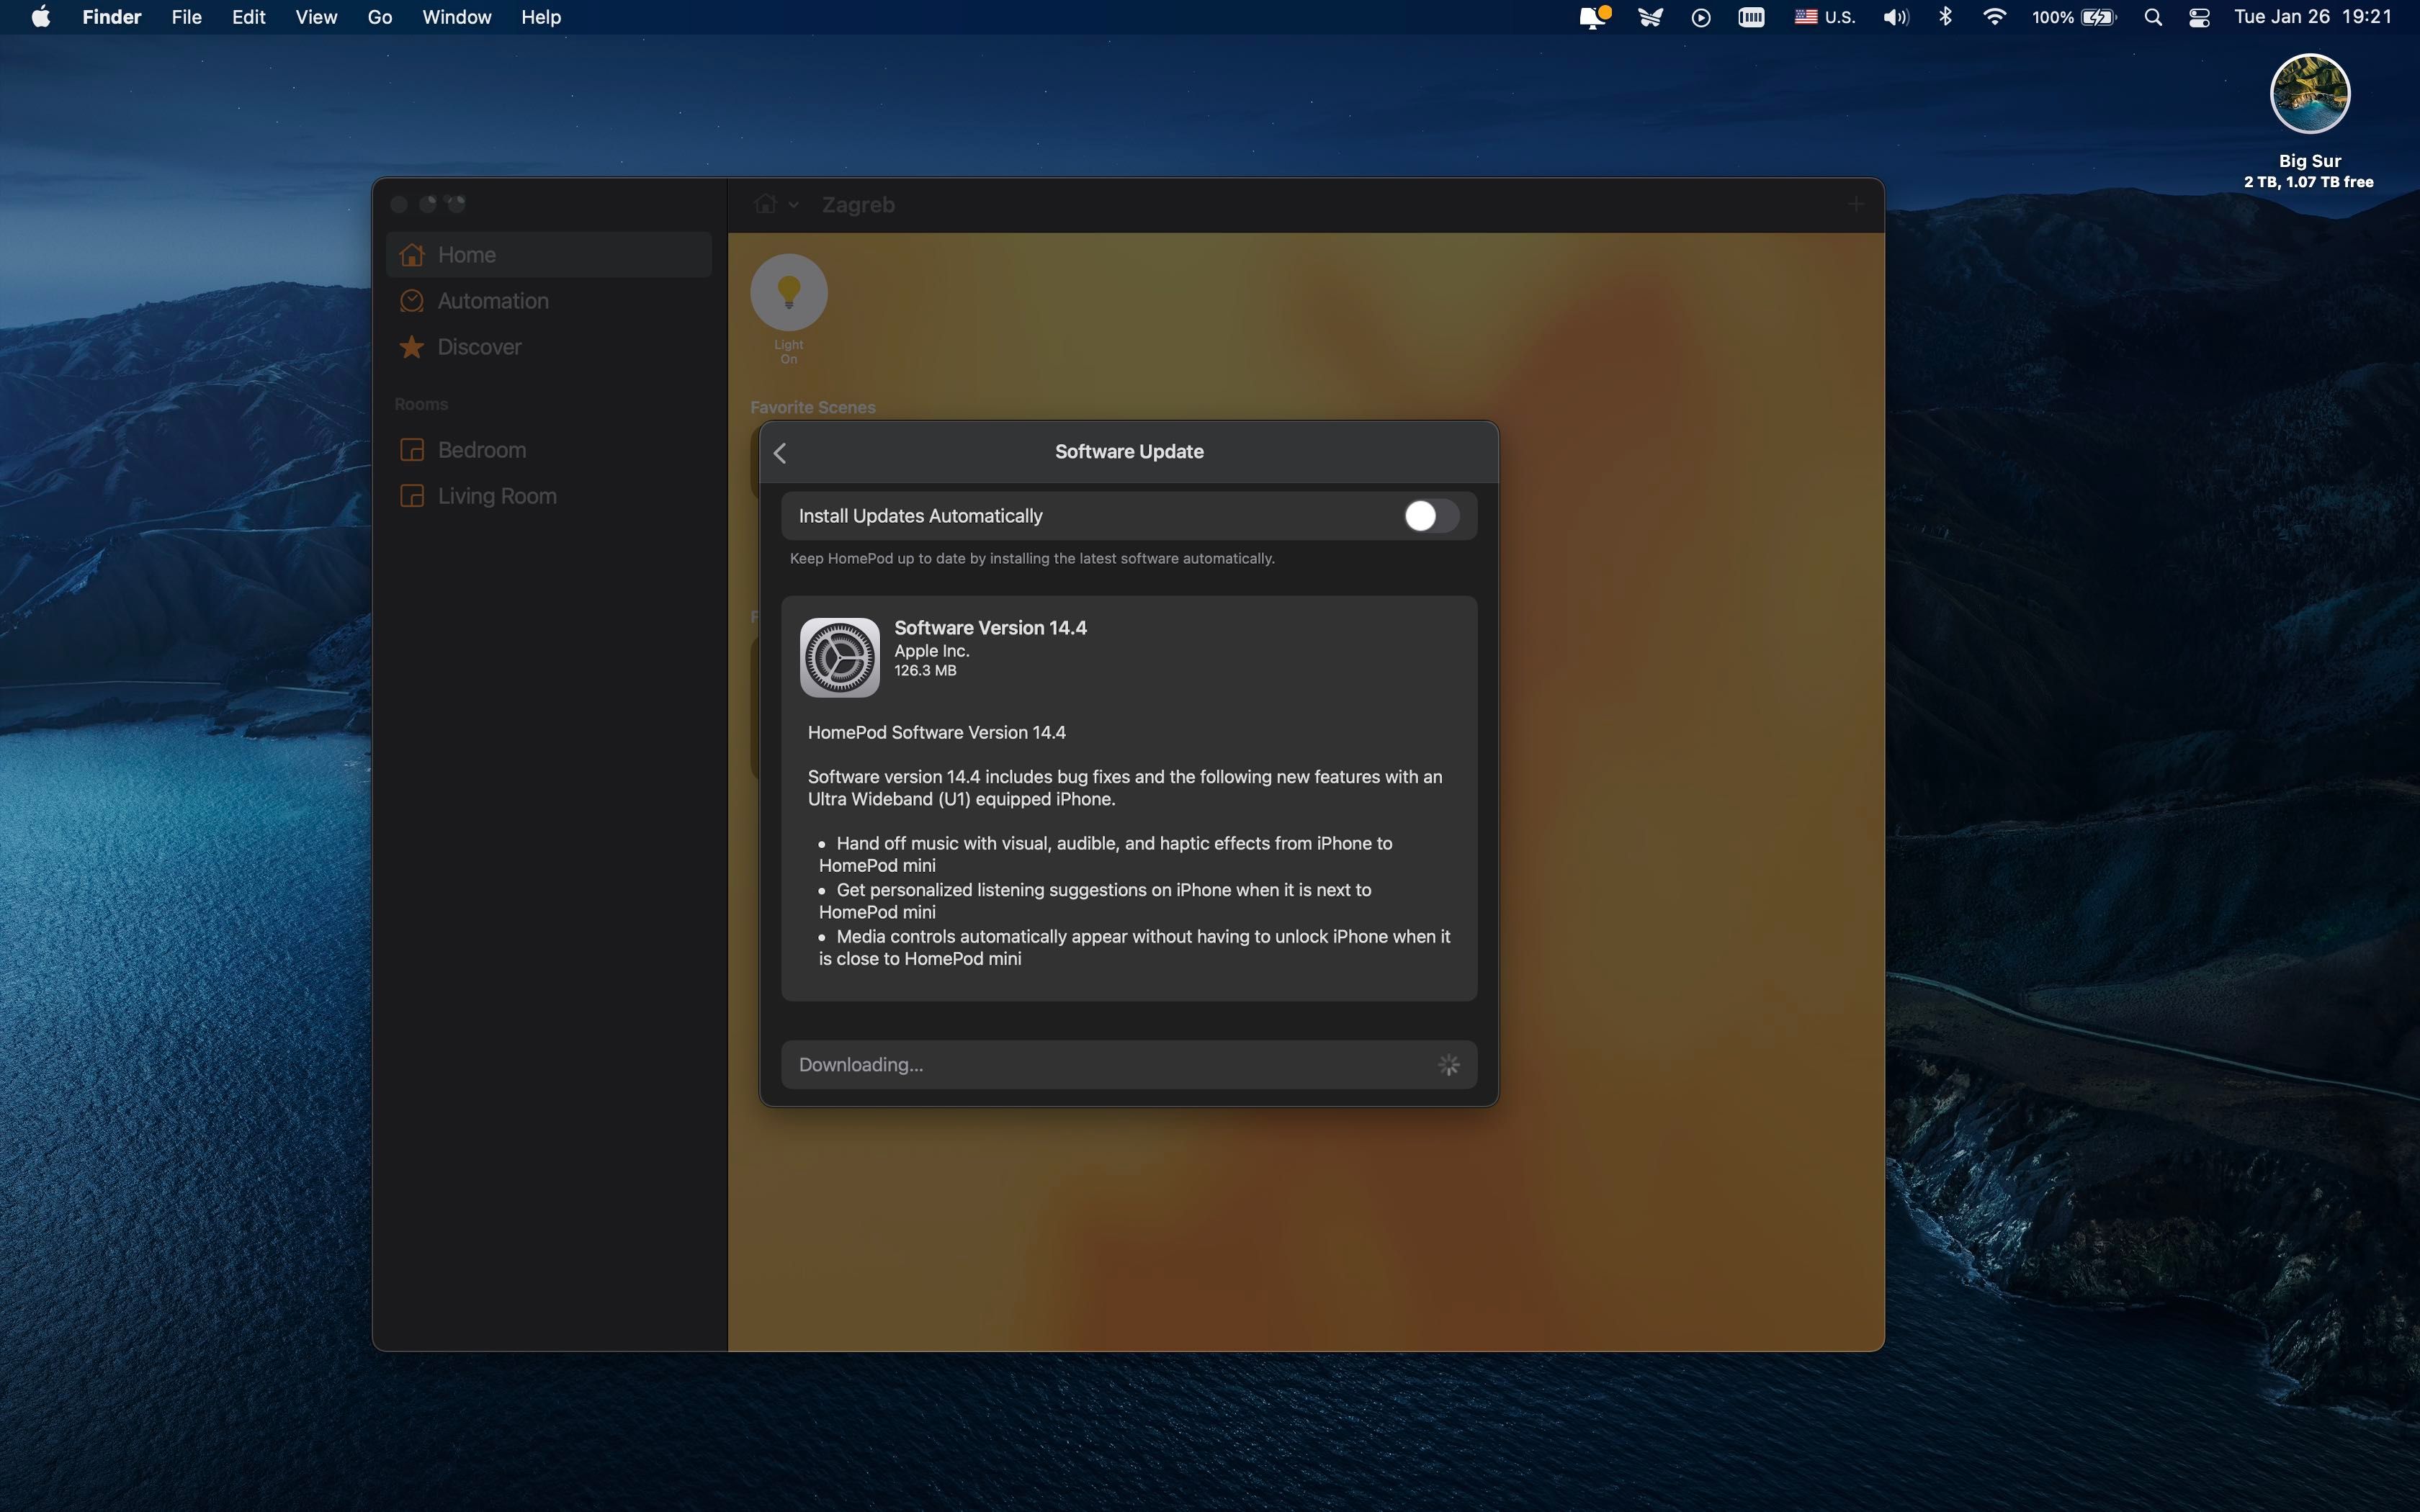 A Mac screenshot showing the Home app with the HomePod software 14.4 update prompt displayed